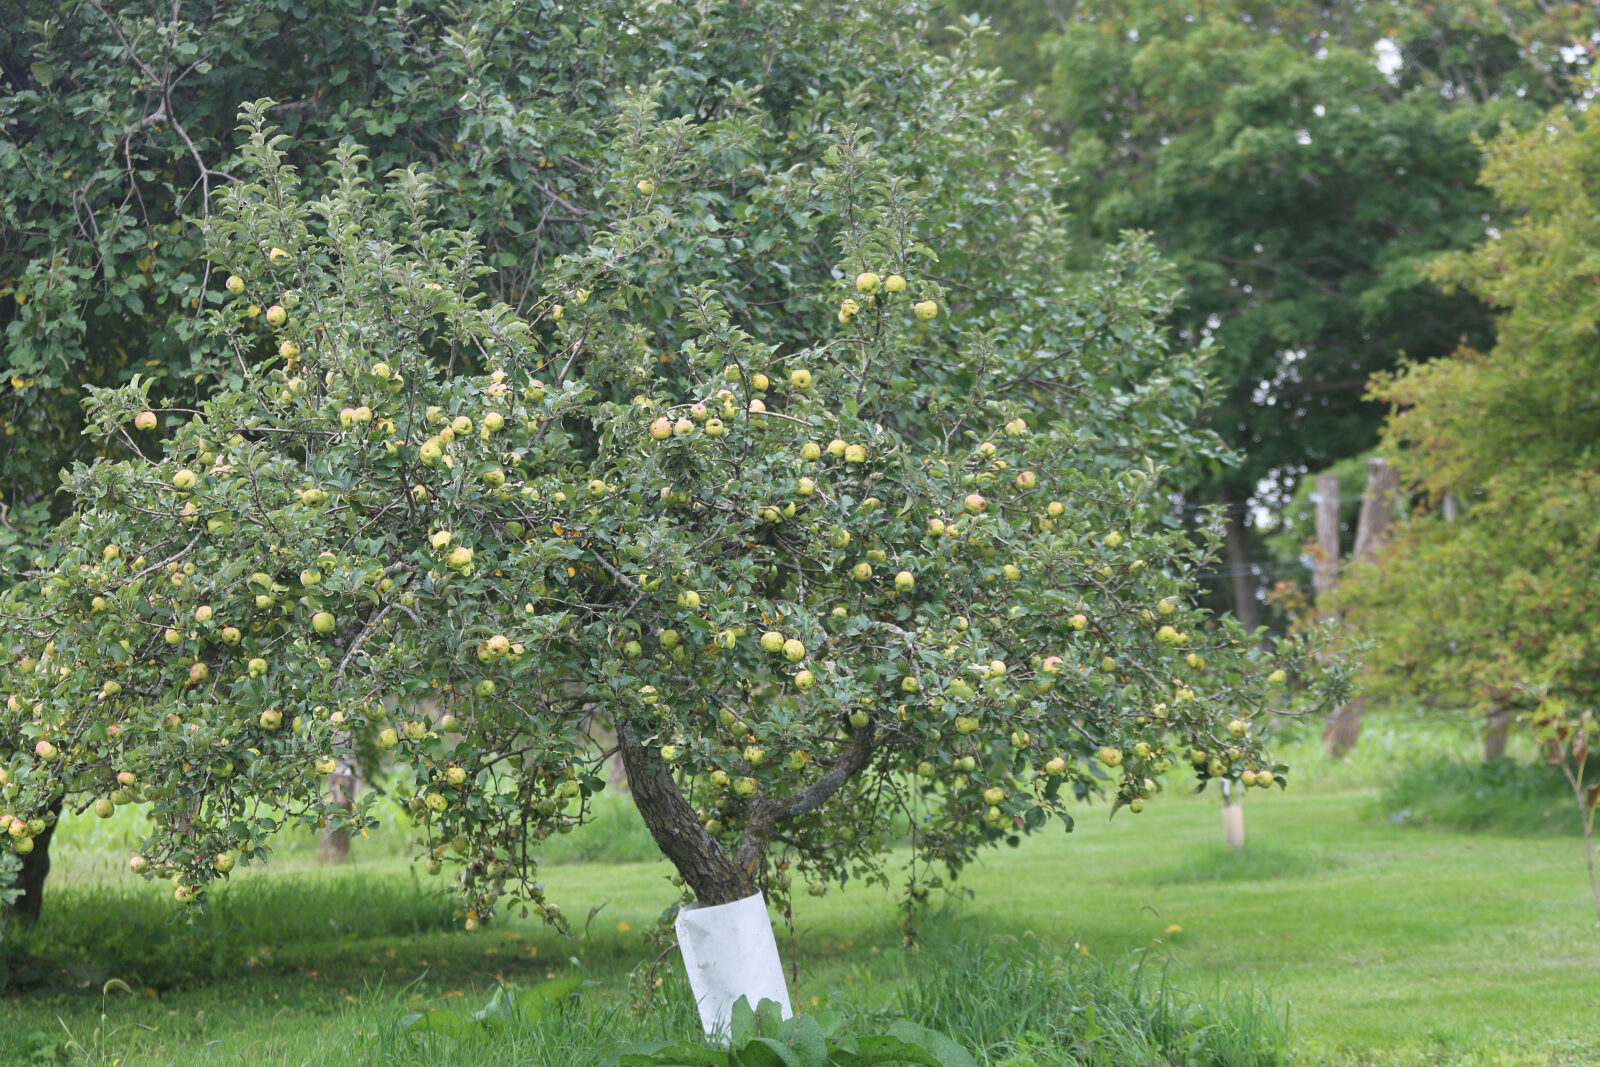 Apple tree filled with green apples.